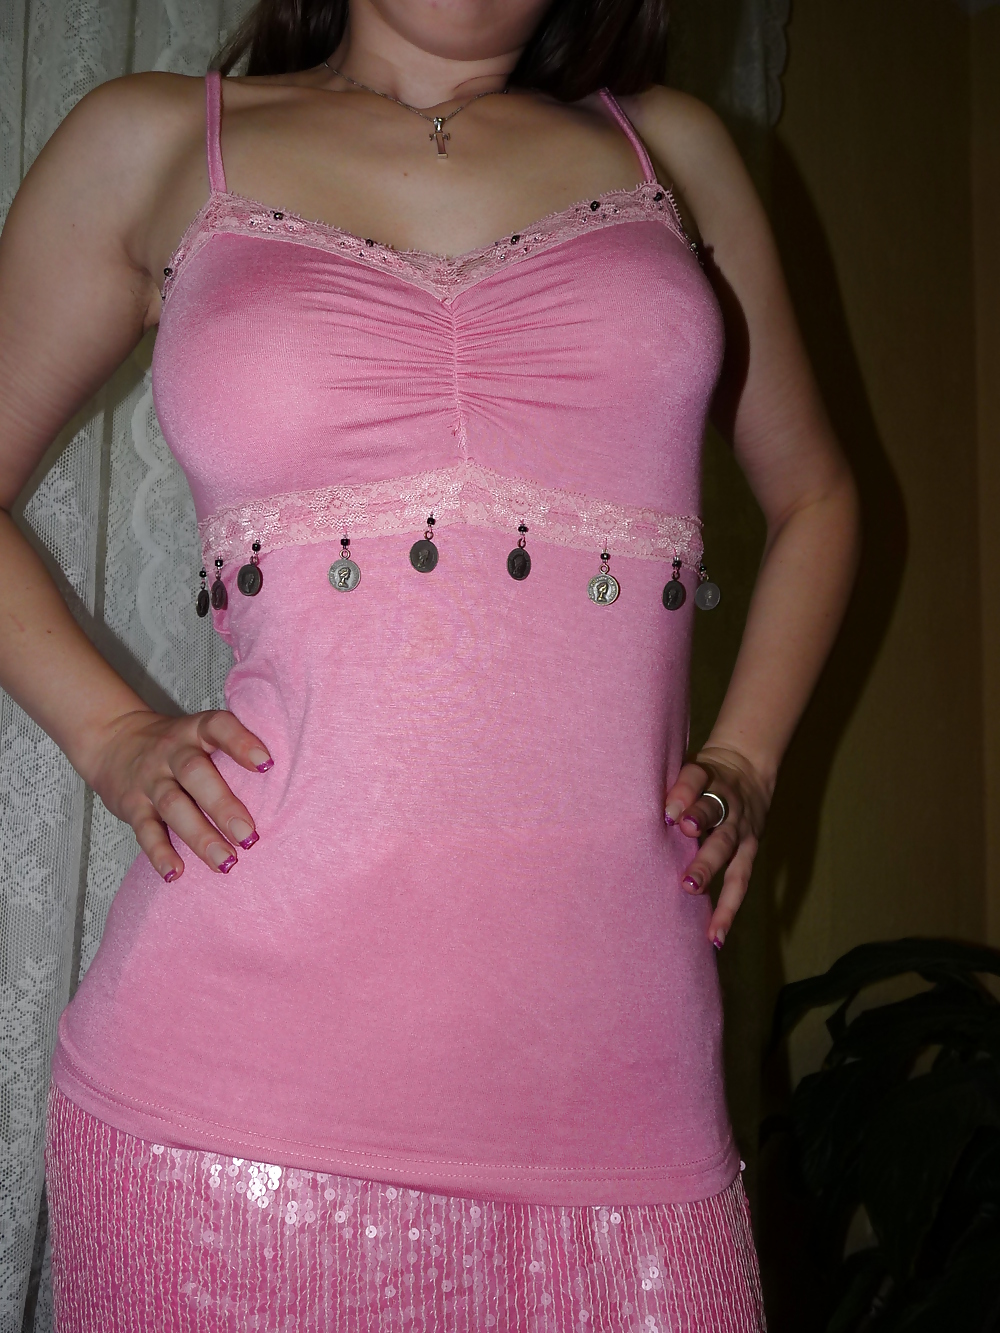 Porn image wifes sexy short pink dresses